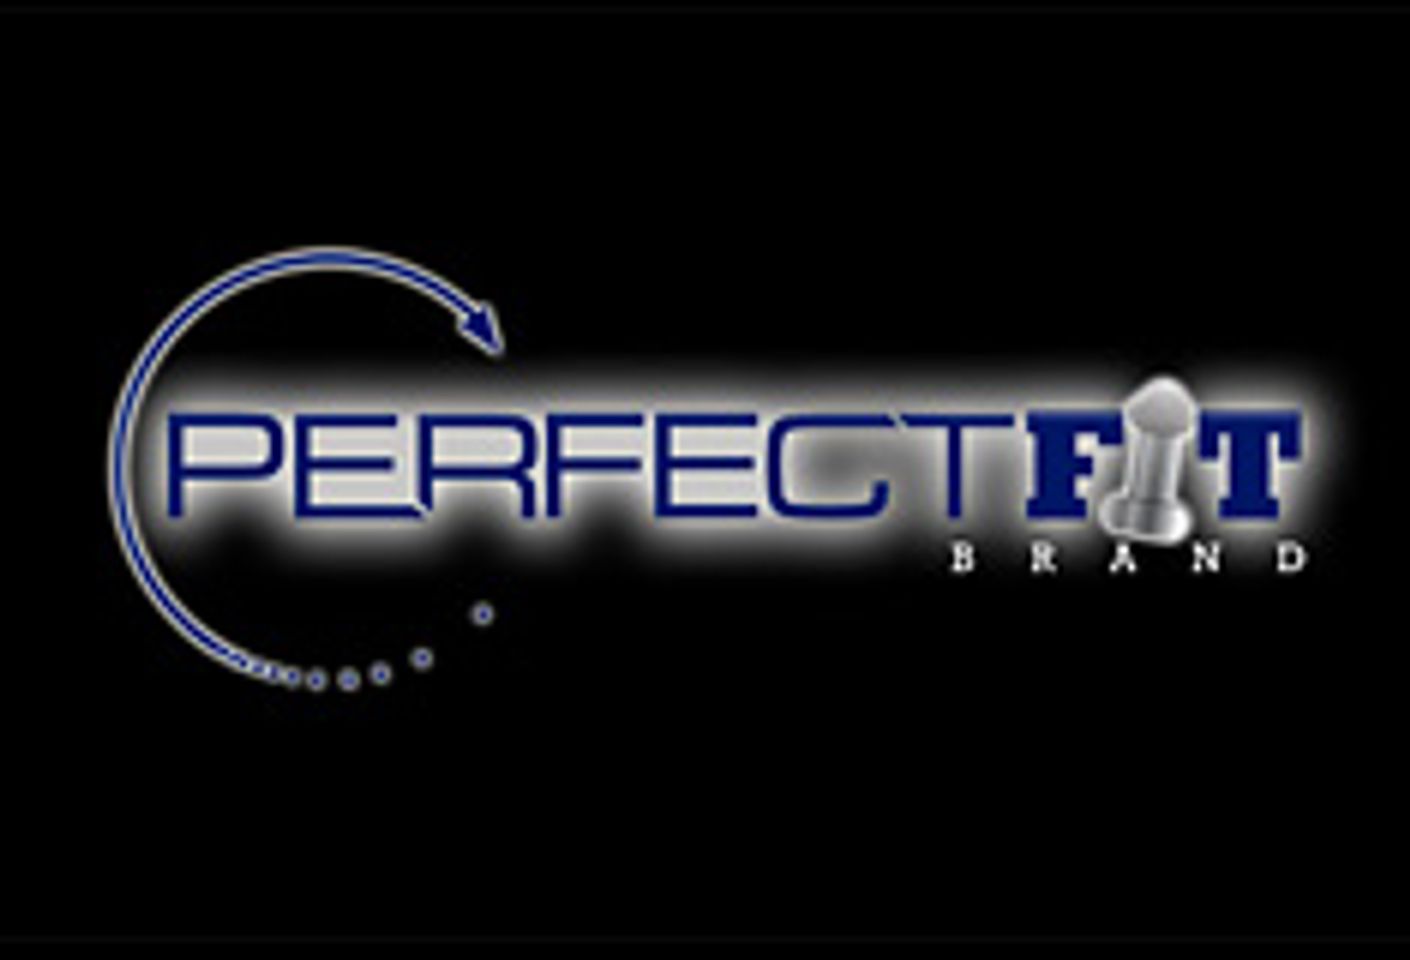  Eropartner Distribution Becomes Official Partner of Perfect Fit